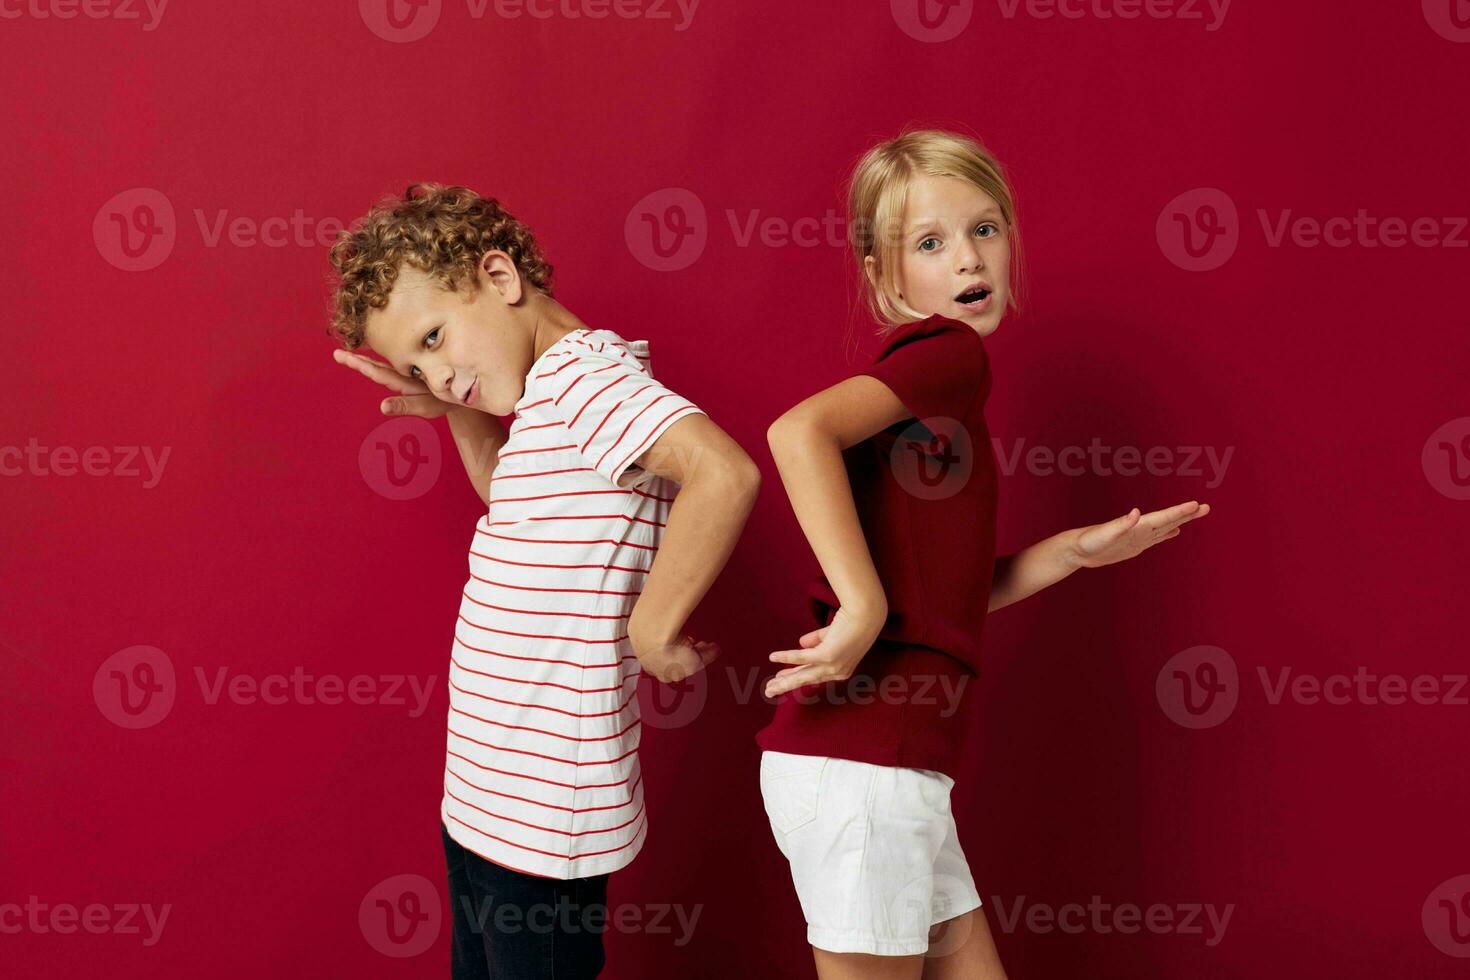 Cute preschool kids emotions stand side by side in everyday clothes red background photo